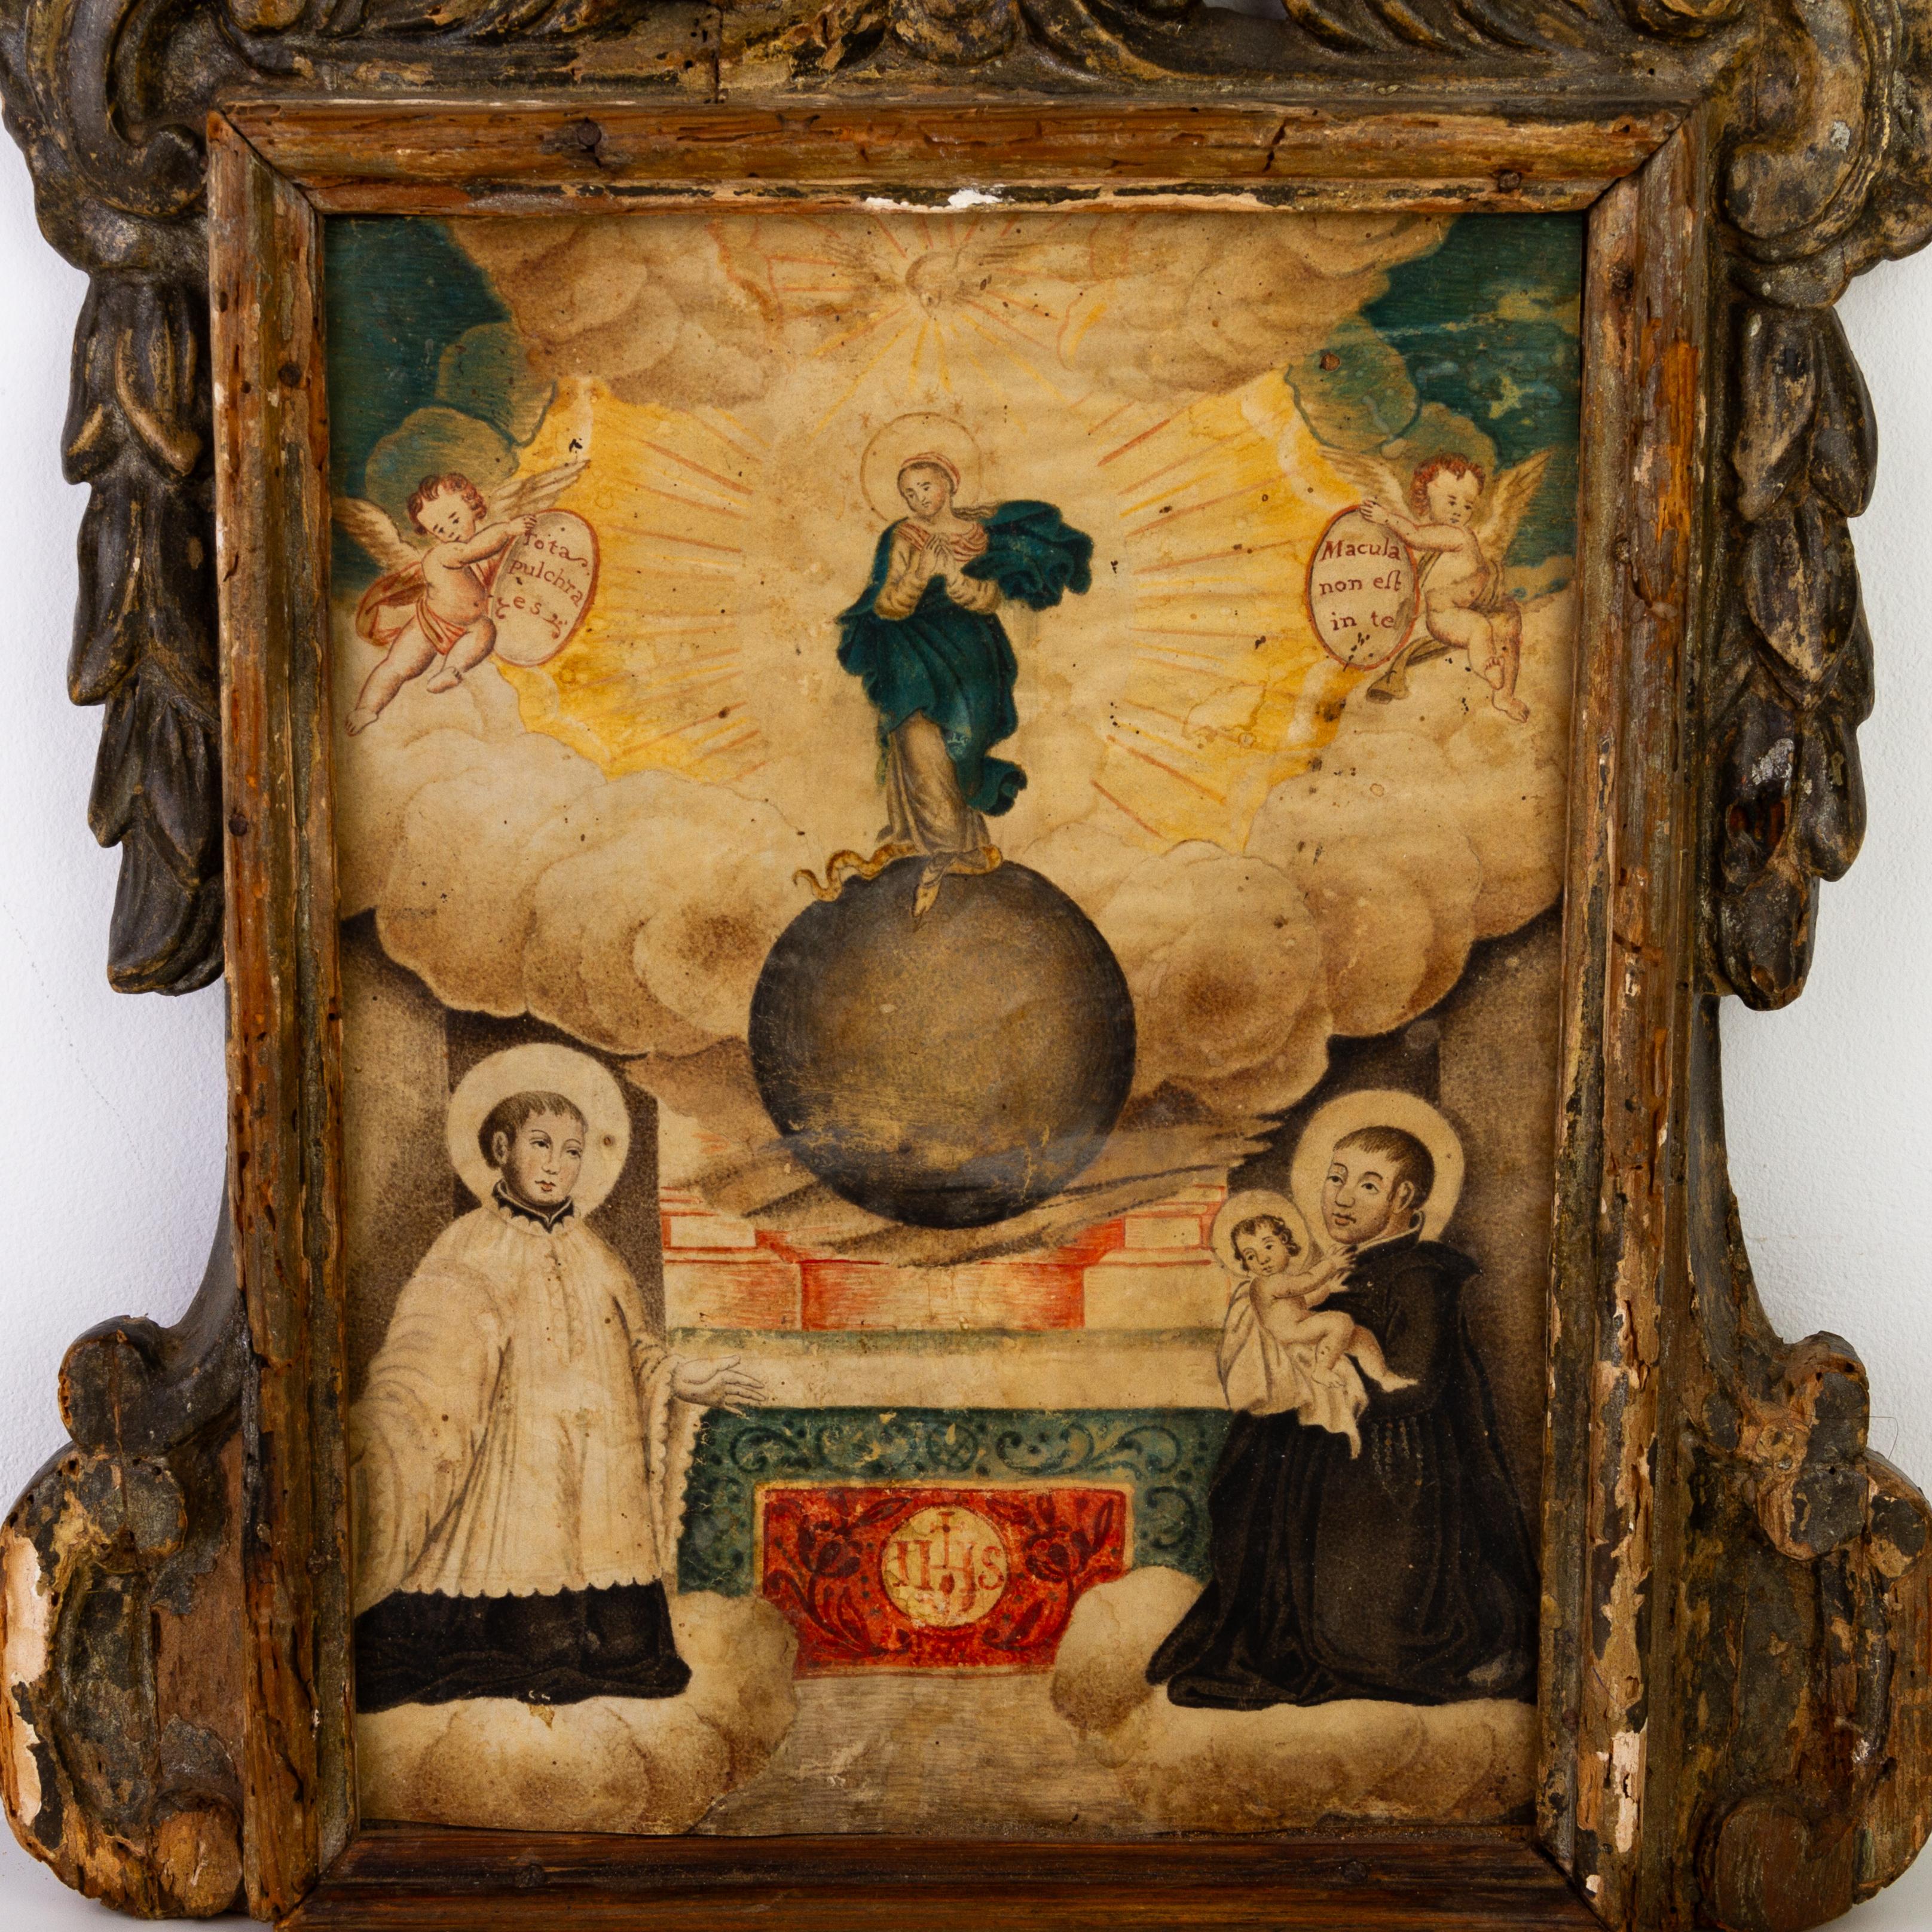 In good condition
From a private collection
Free international shipping
17th Century Old Master Painting on Vellum Madonna & Saints
